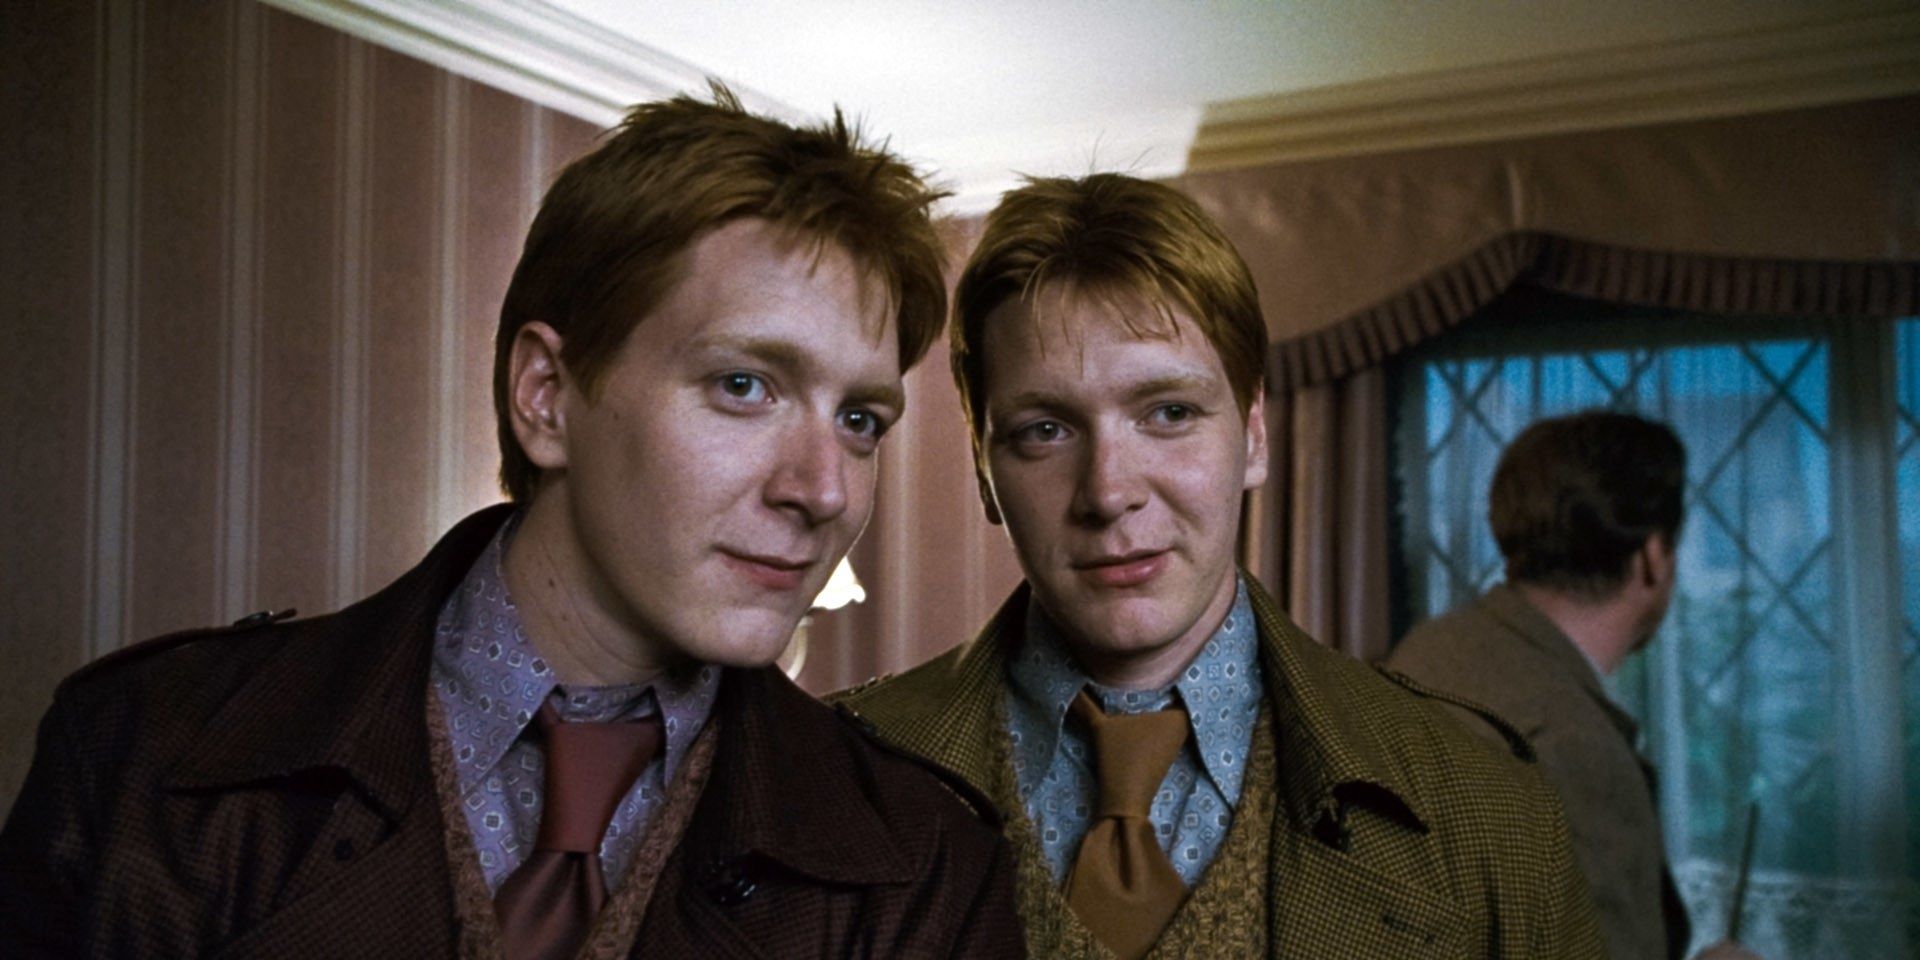 Fred and George together in Harry Potter Deathly Hallows Part 1